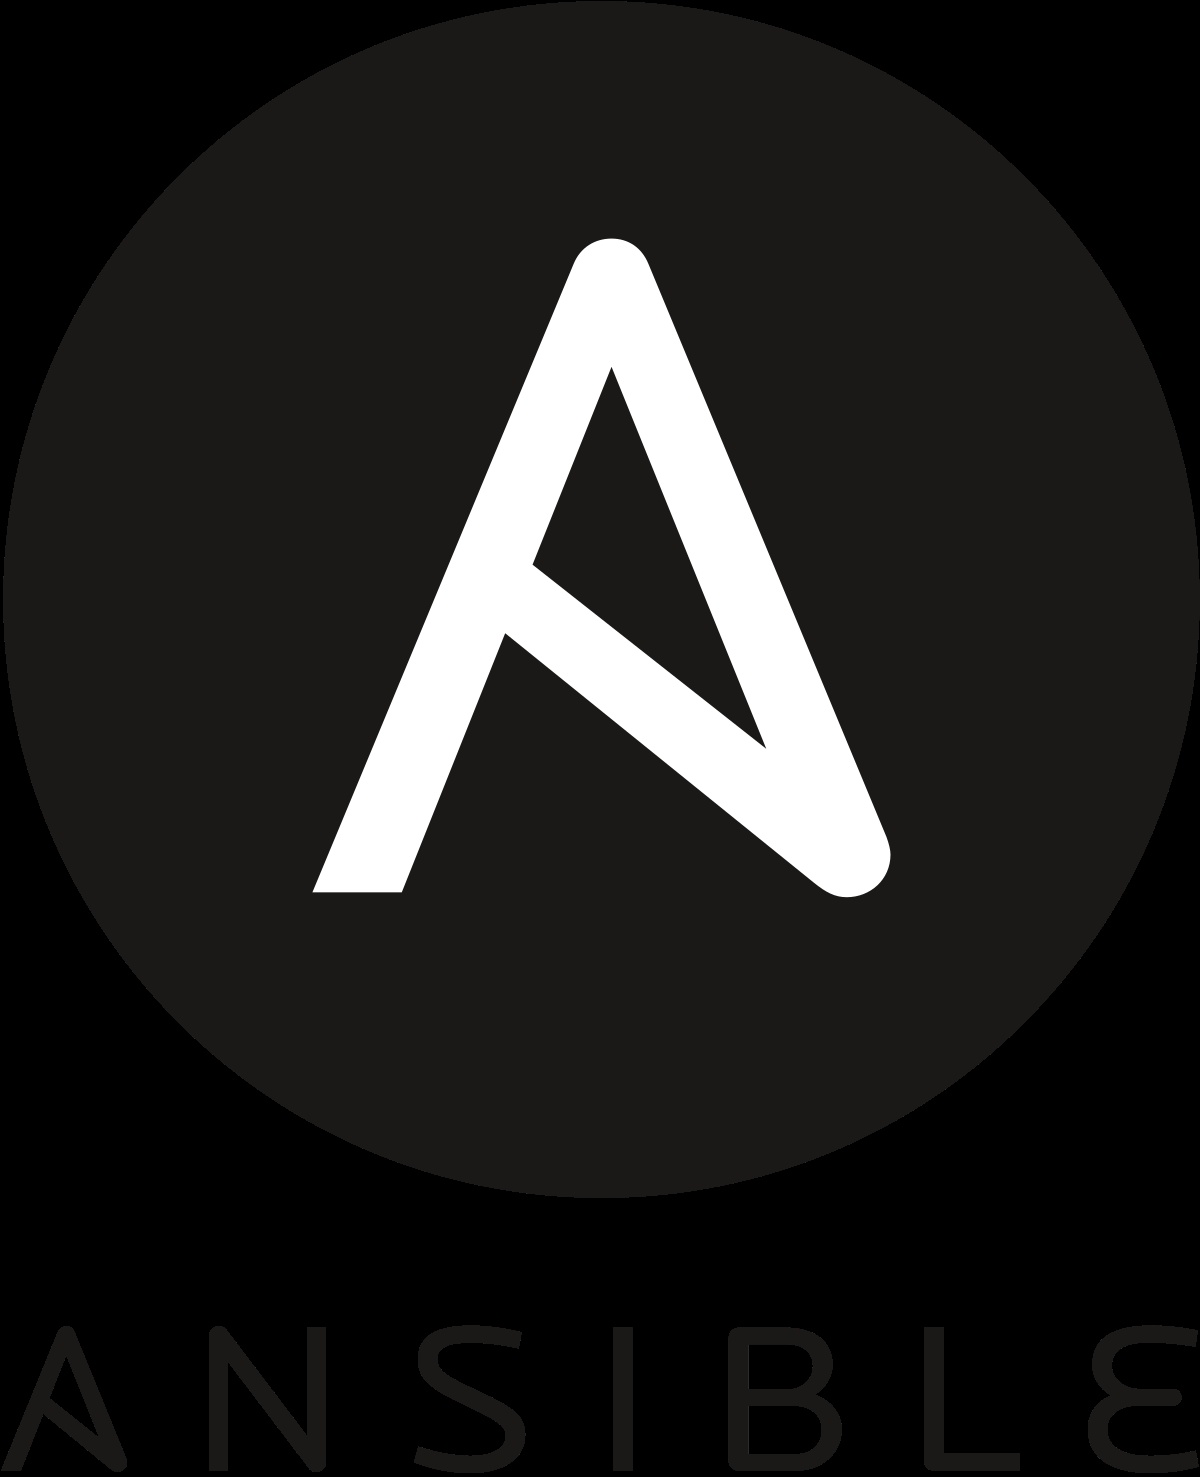 Ansible project : how to contribute ?